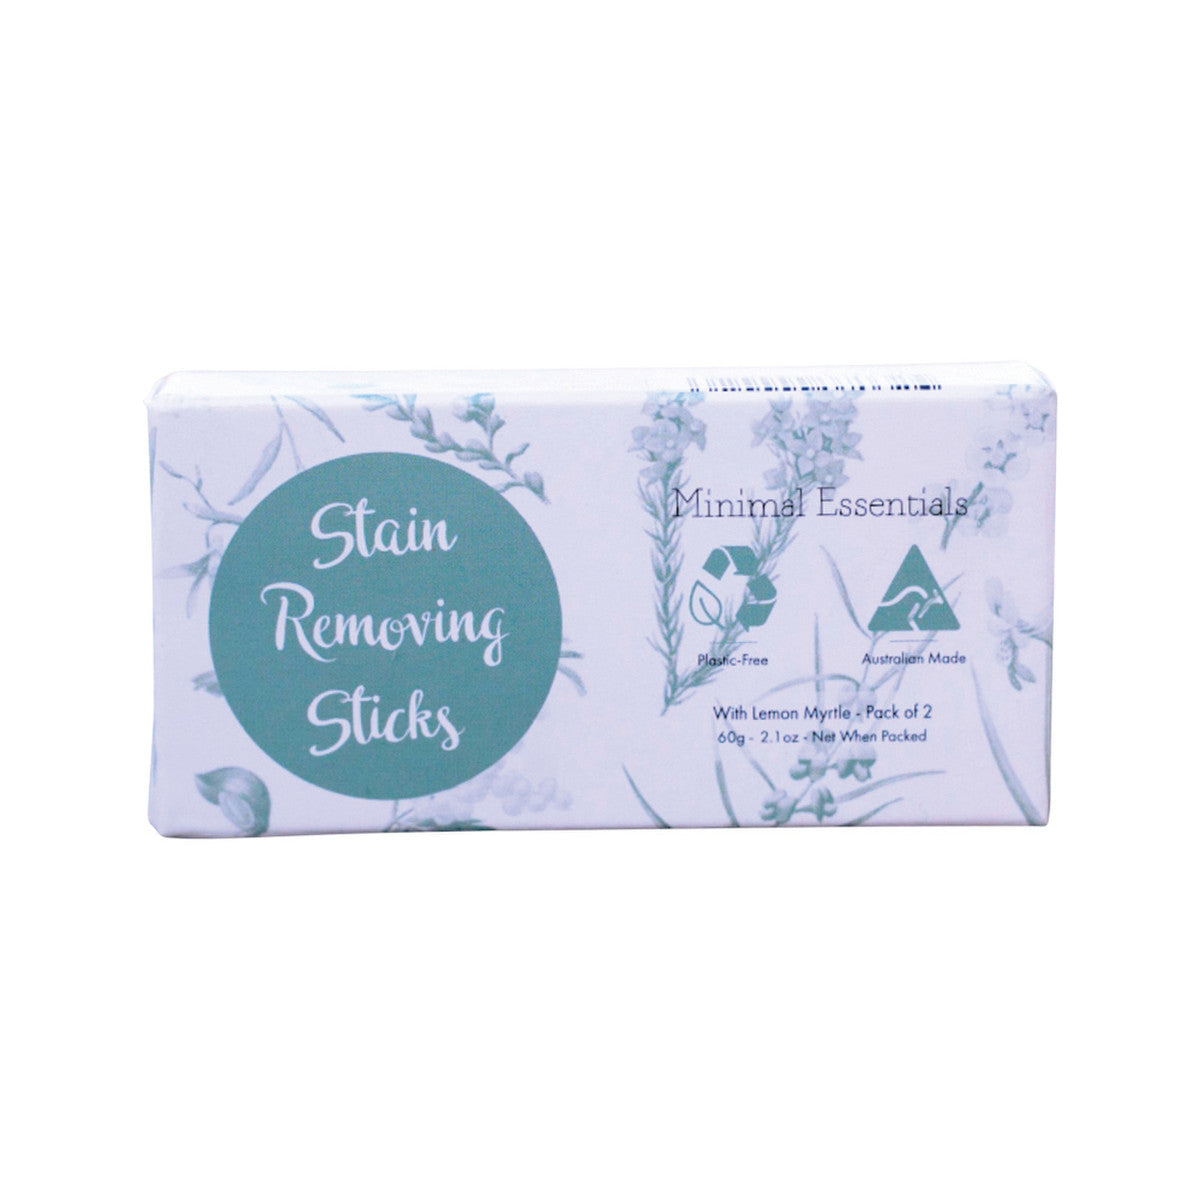 Minimal Essentials - Stain-Removing Laundry Sticks with Lemon Myrtle x 2 Pack